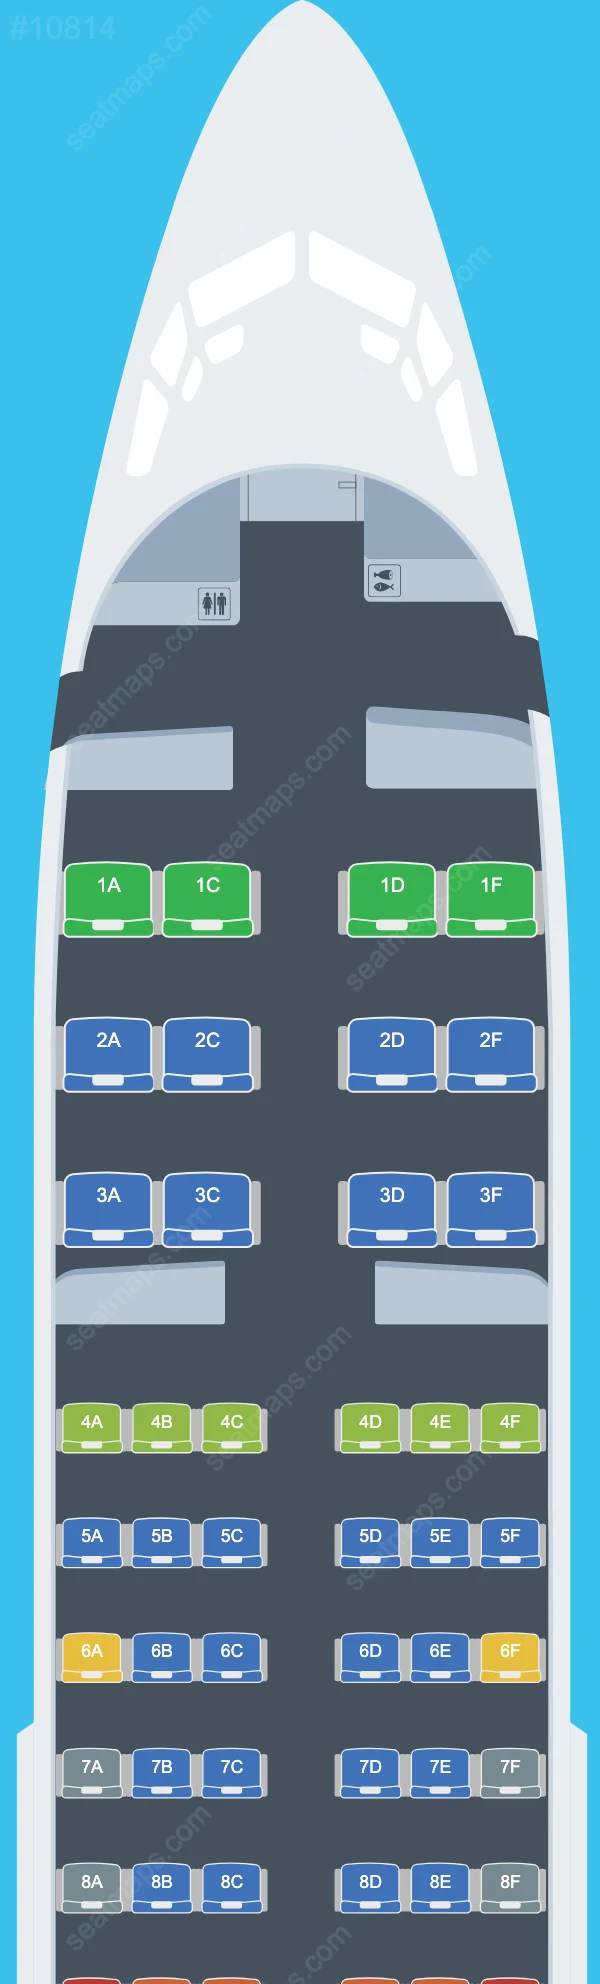 Cabo Verde Airlines Boeing 737 Seat Maps 737-700